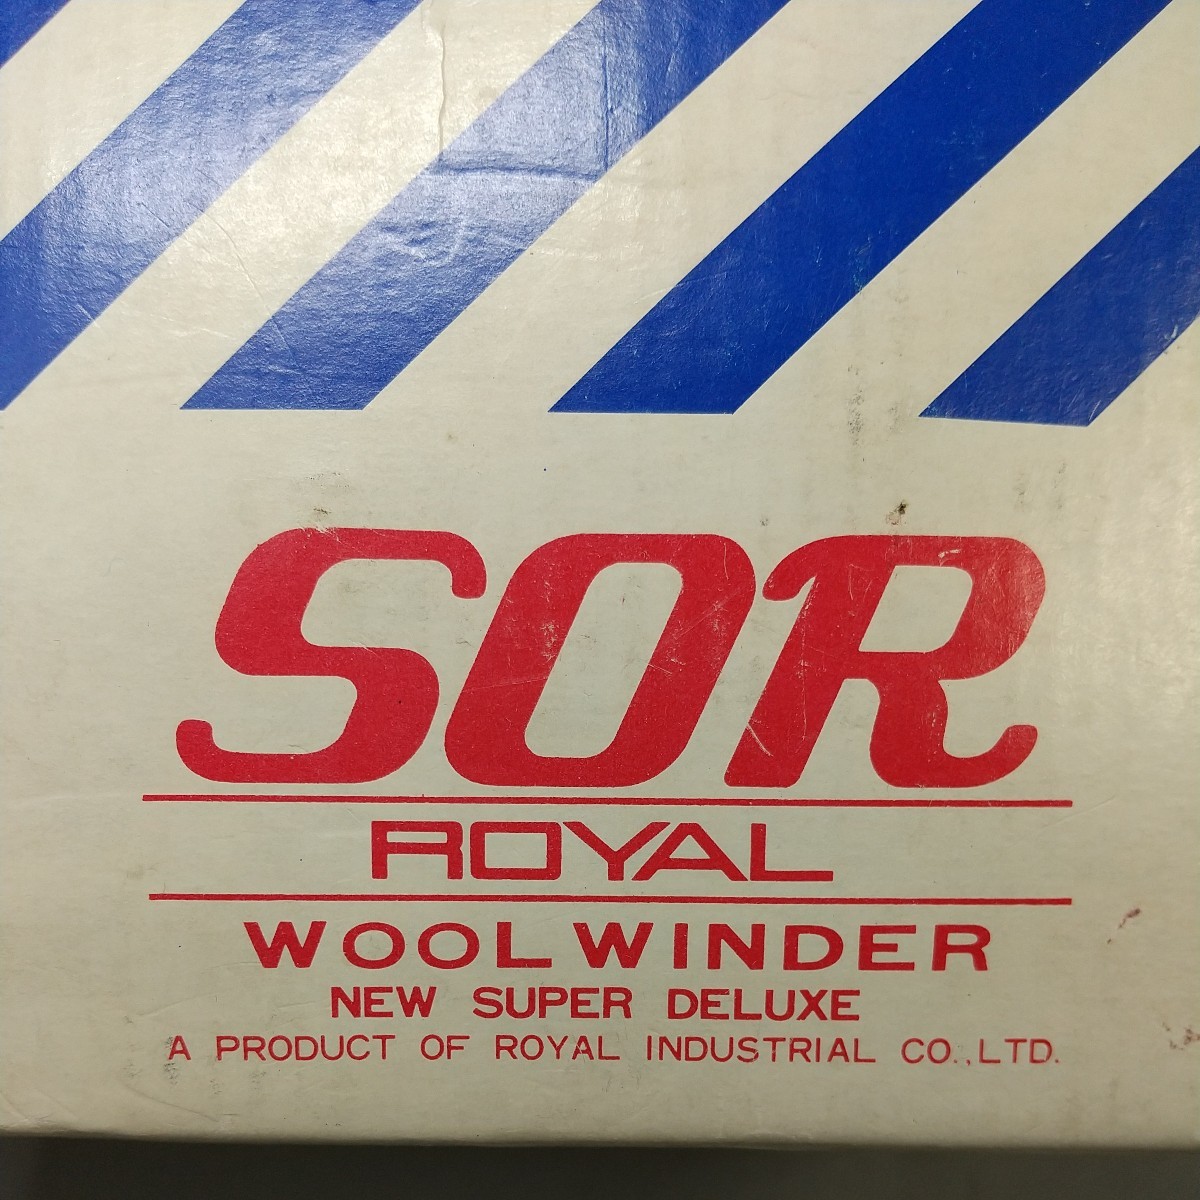 5674* including in a package NG SOR sole ROYAL Royal WOOL WINDER knitting wool hand-knitted sphere volume vessel original box .... vessel lace thread to coil vessel operation goods handicrafts hand made used 